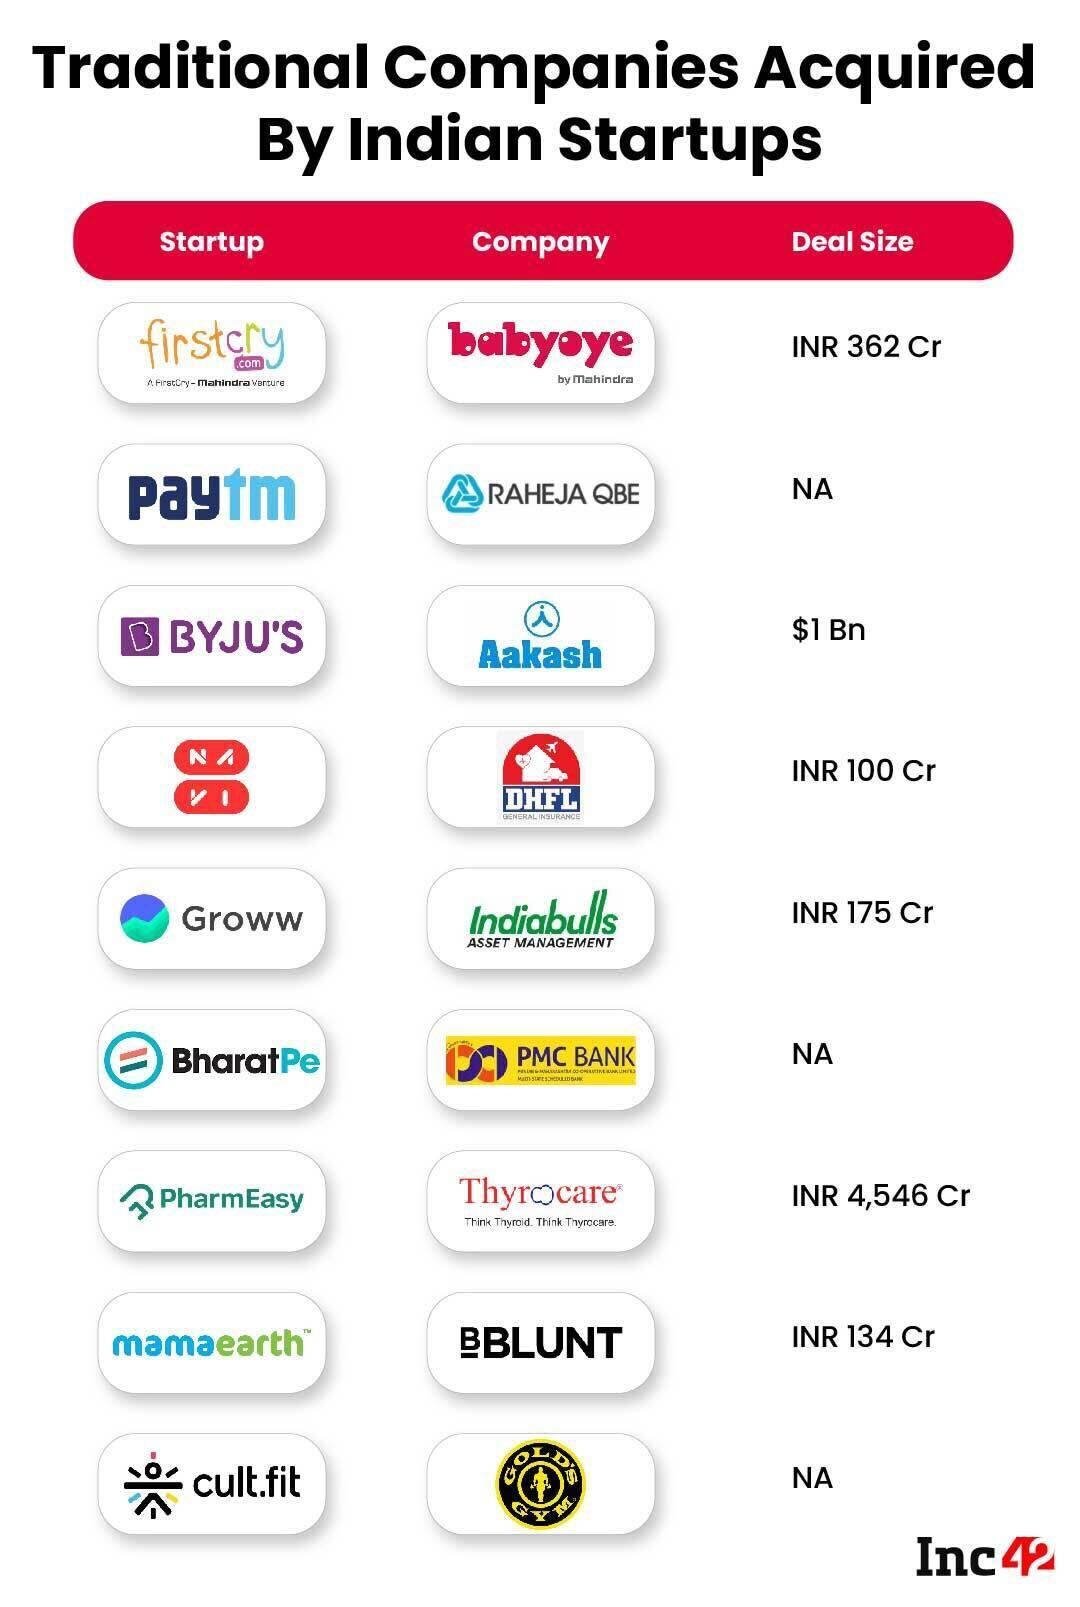 Traditional Companies Acquired By Indian Startups